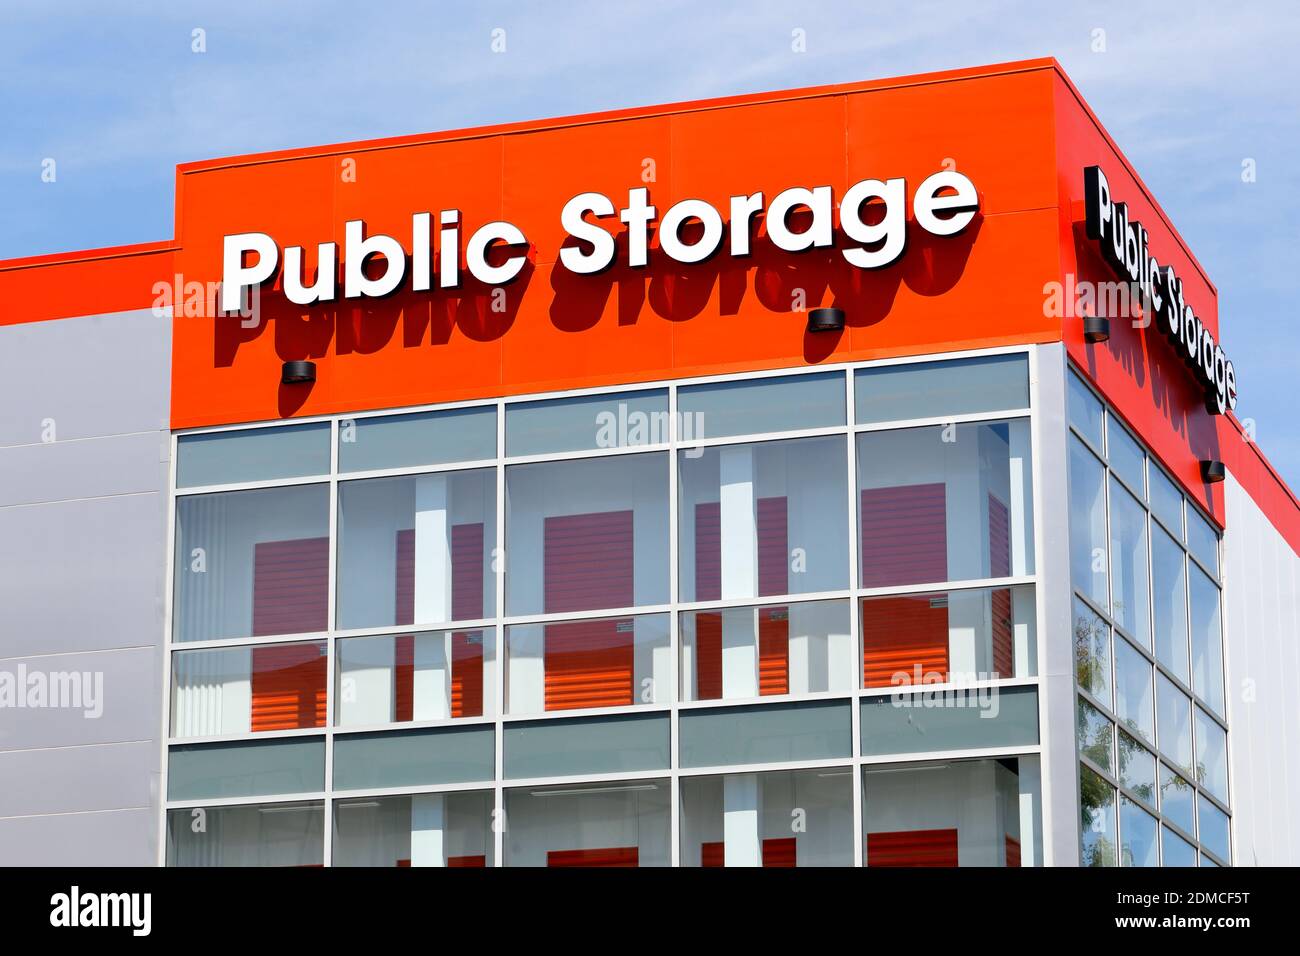 Public Storage, 5002 2nd Ave, Brooklyn, NY. exterior of a self-storage facility in the Sunset Park neighborhood. Stock Photo